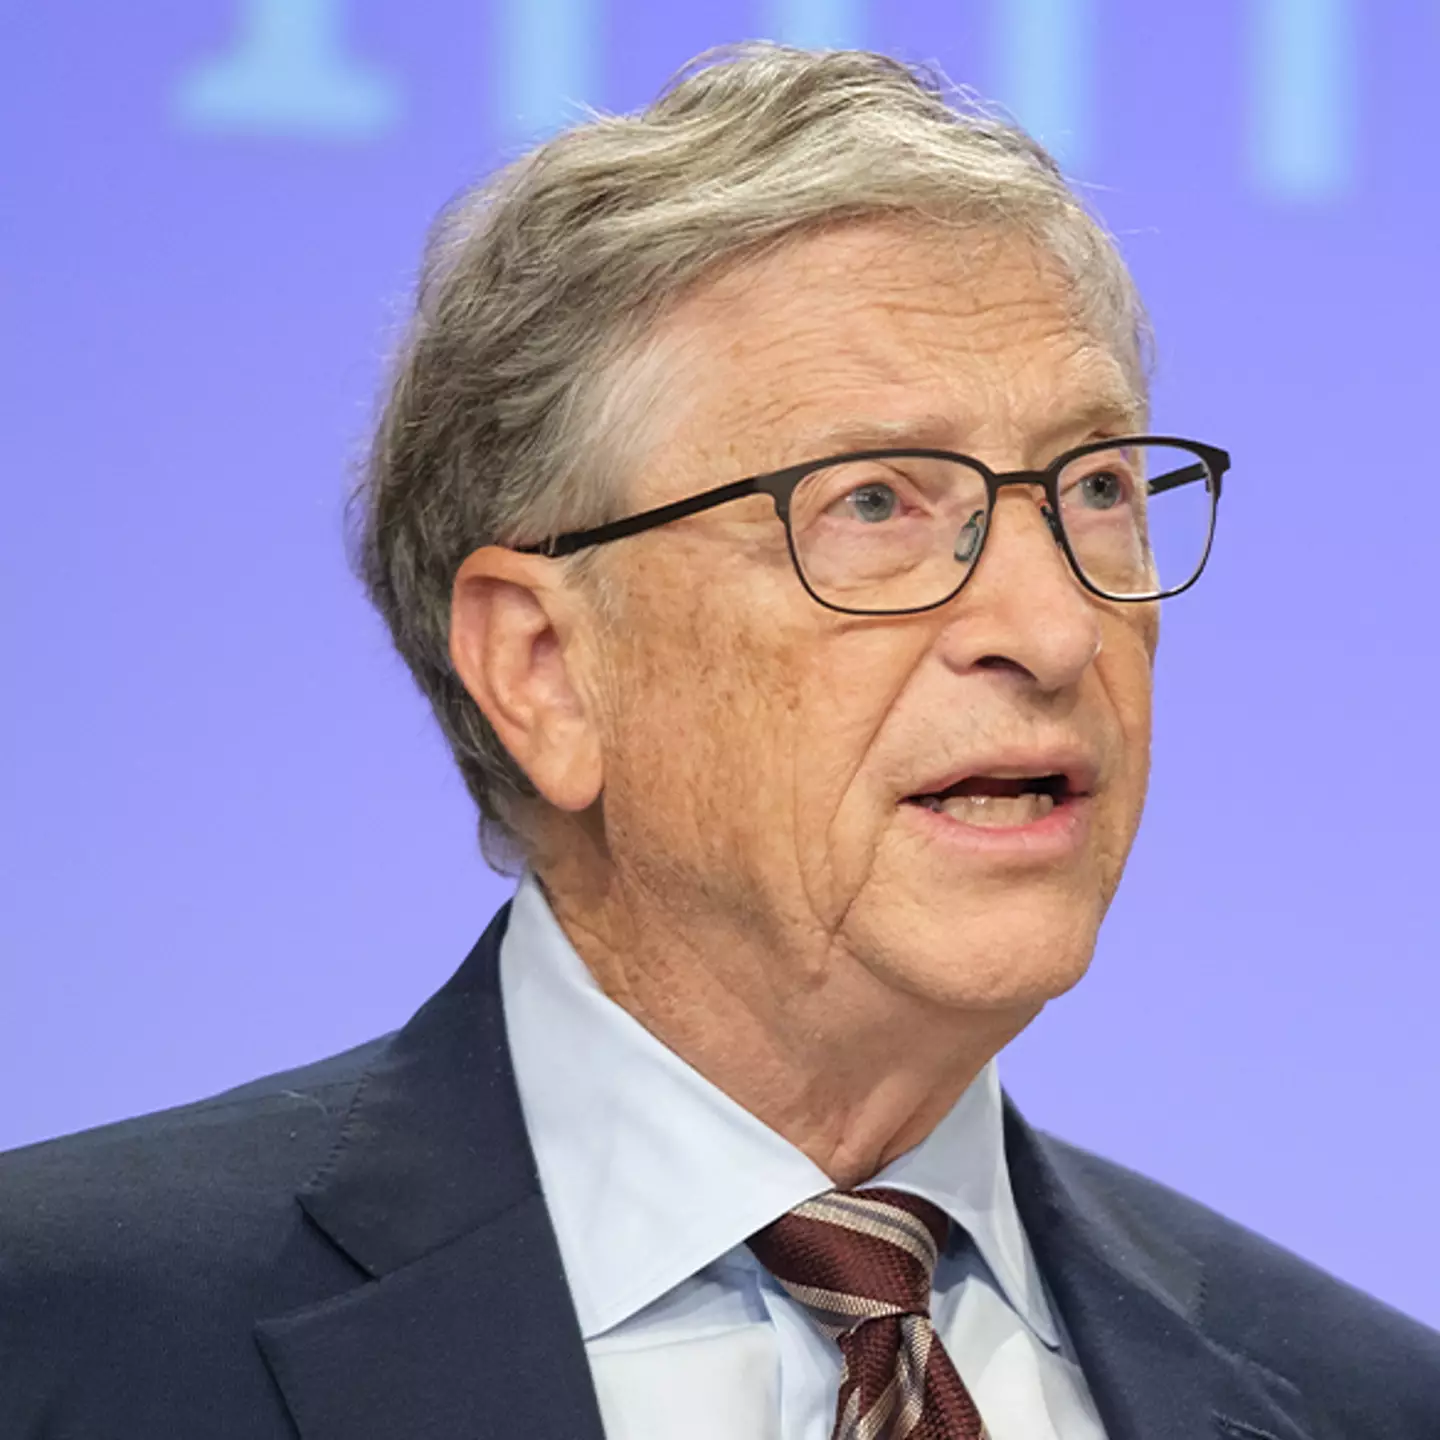 Bill Gates shares shocking message about the limitations of AI